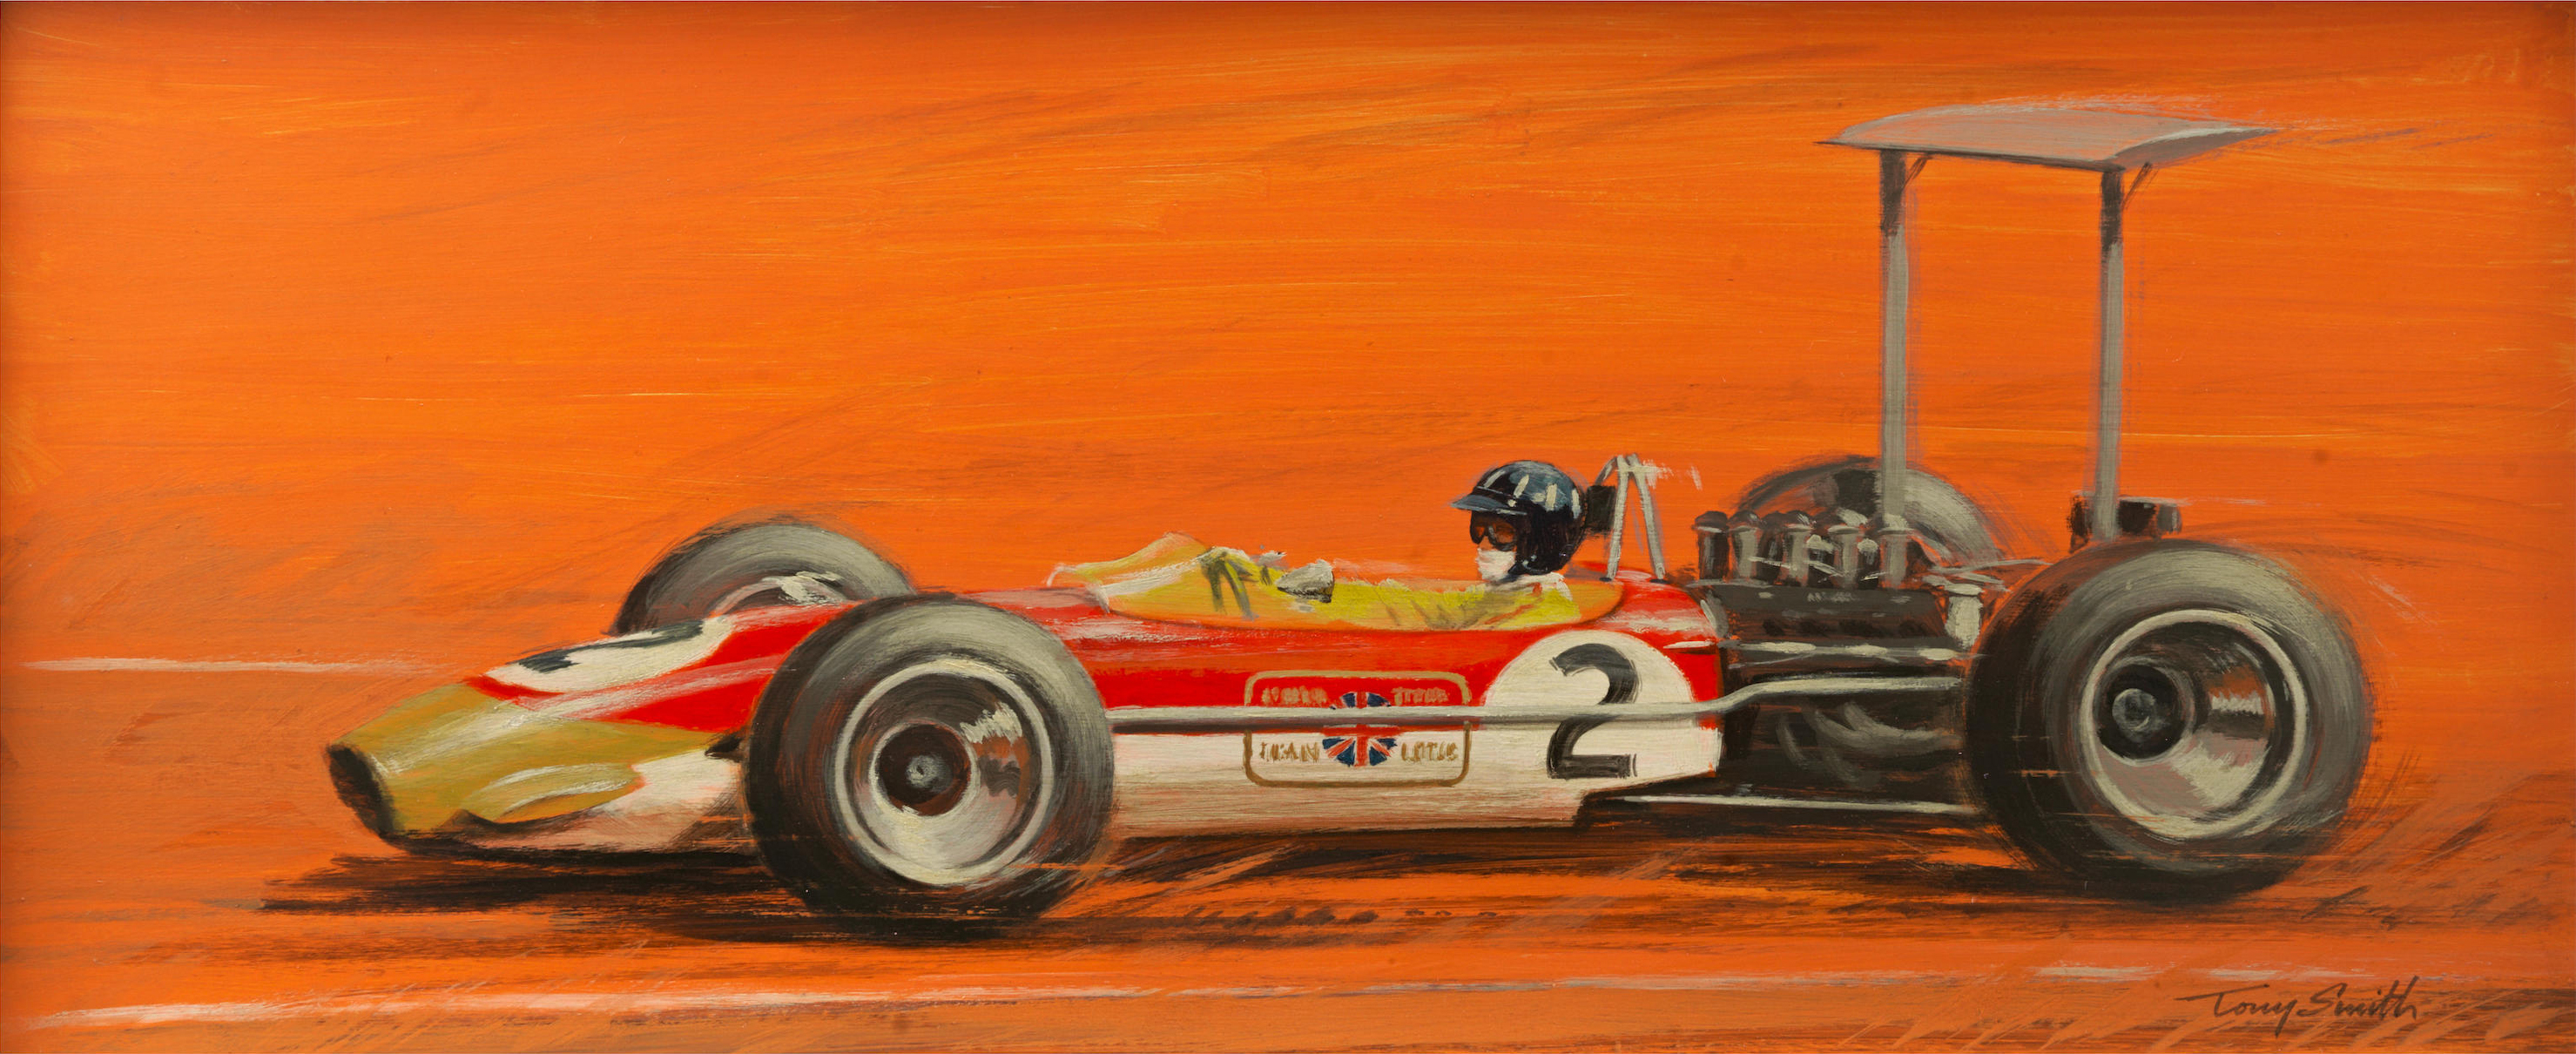 Formula Cars Painting Oil Painting Graham Hill 1968 Lotus 49B High Wing Tony Smith Artwork Side View 2958x1210